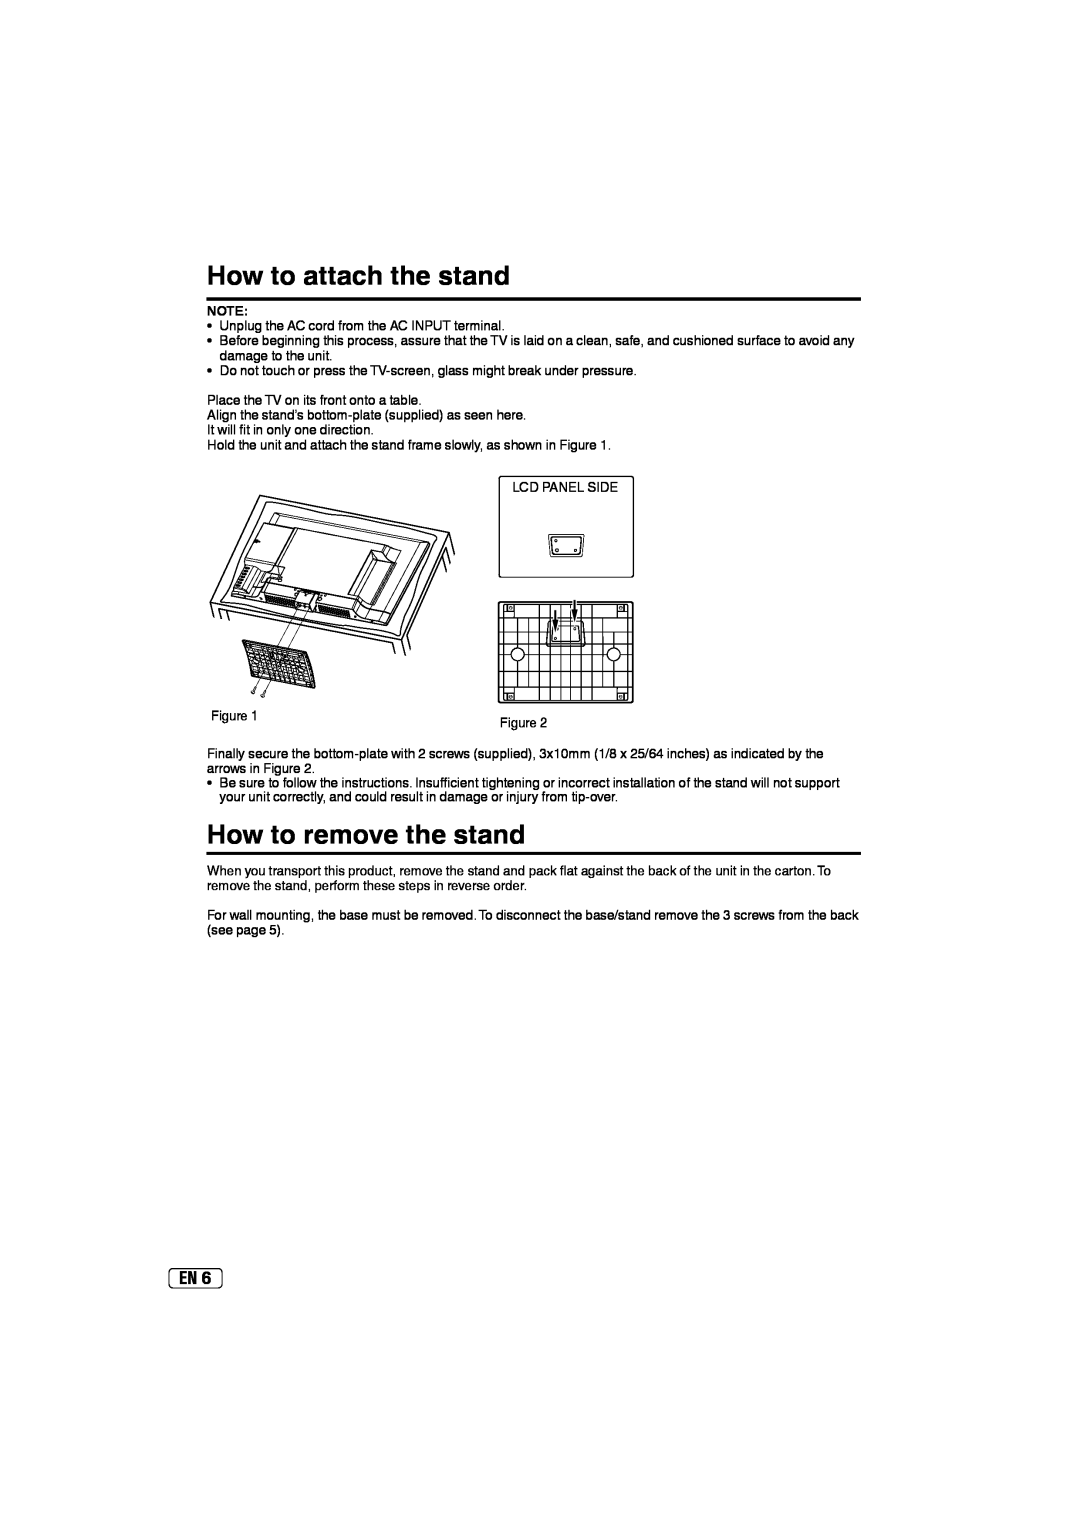 Sansui SLEDVD197 owner manual How to attach the stand, How to remove the stand 